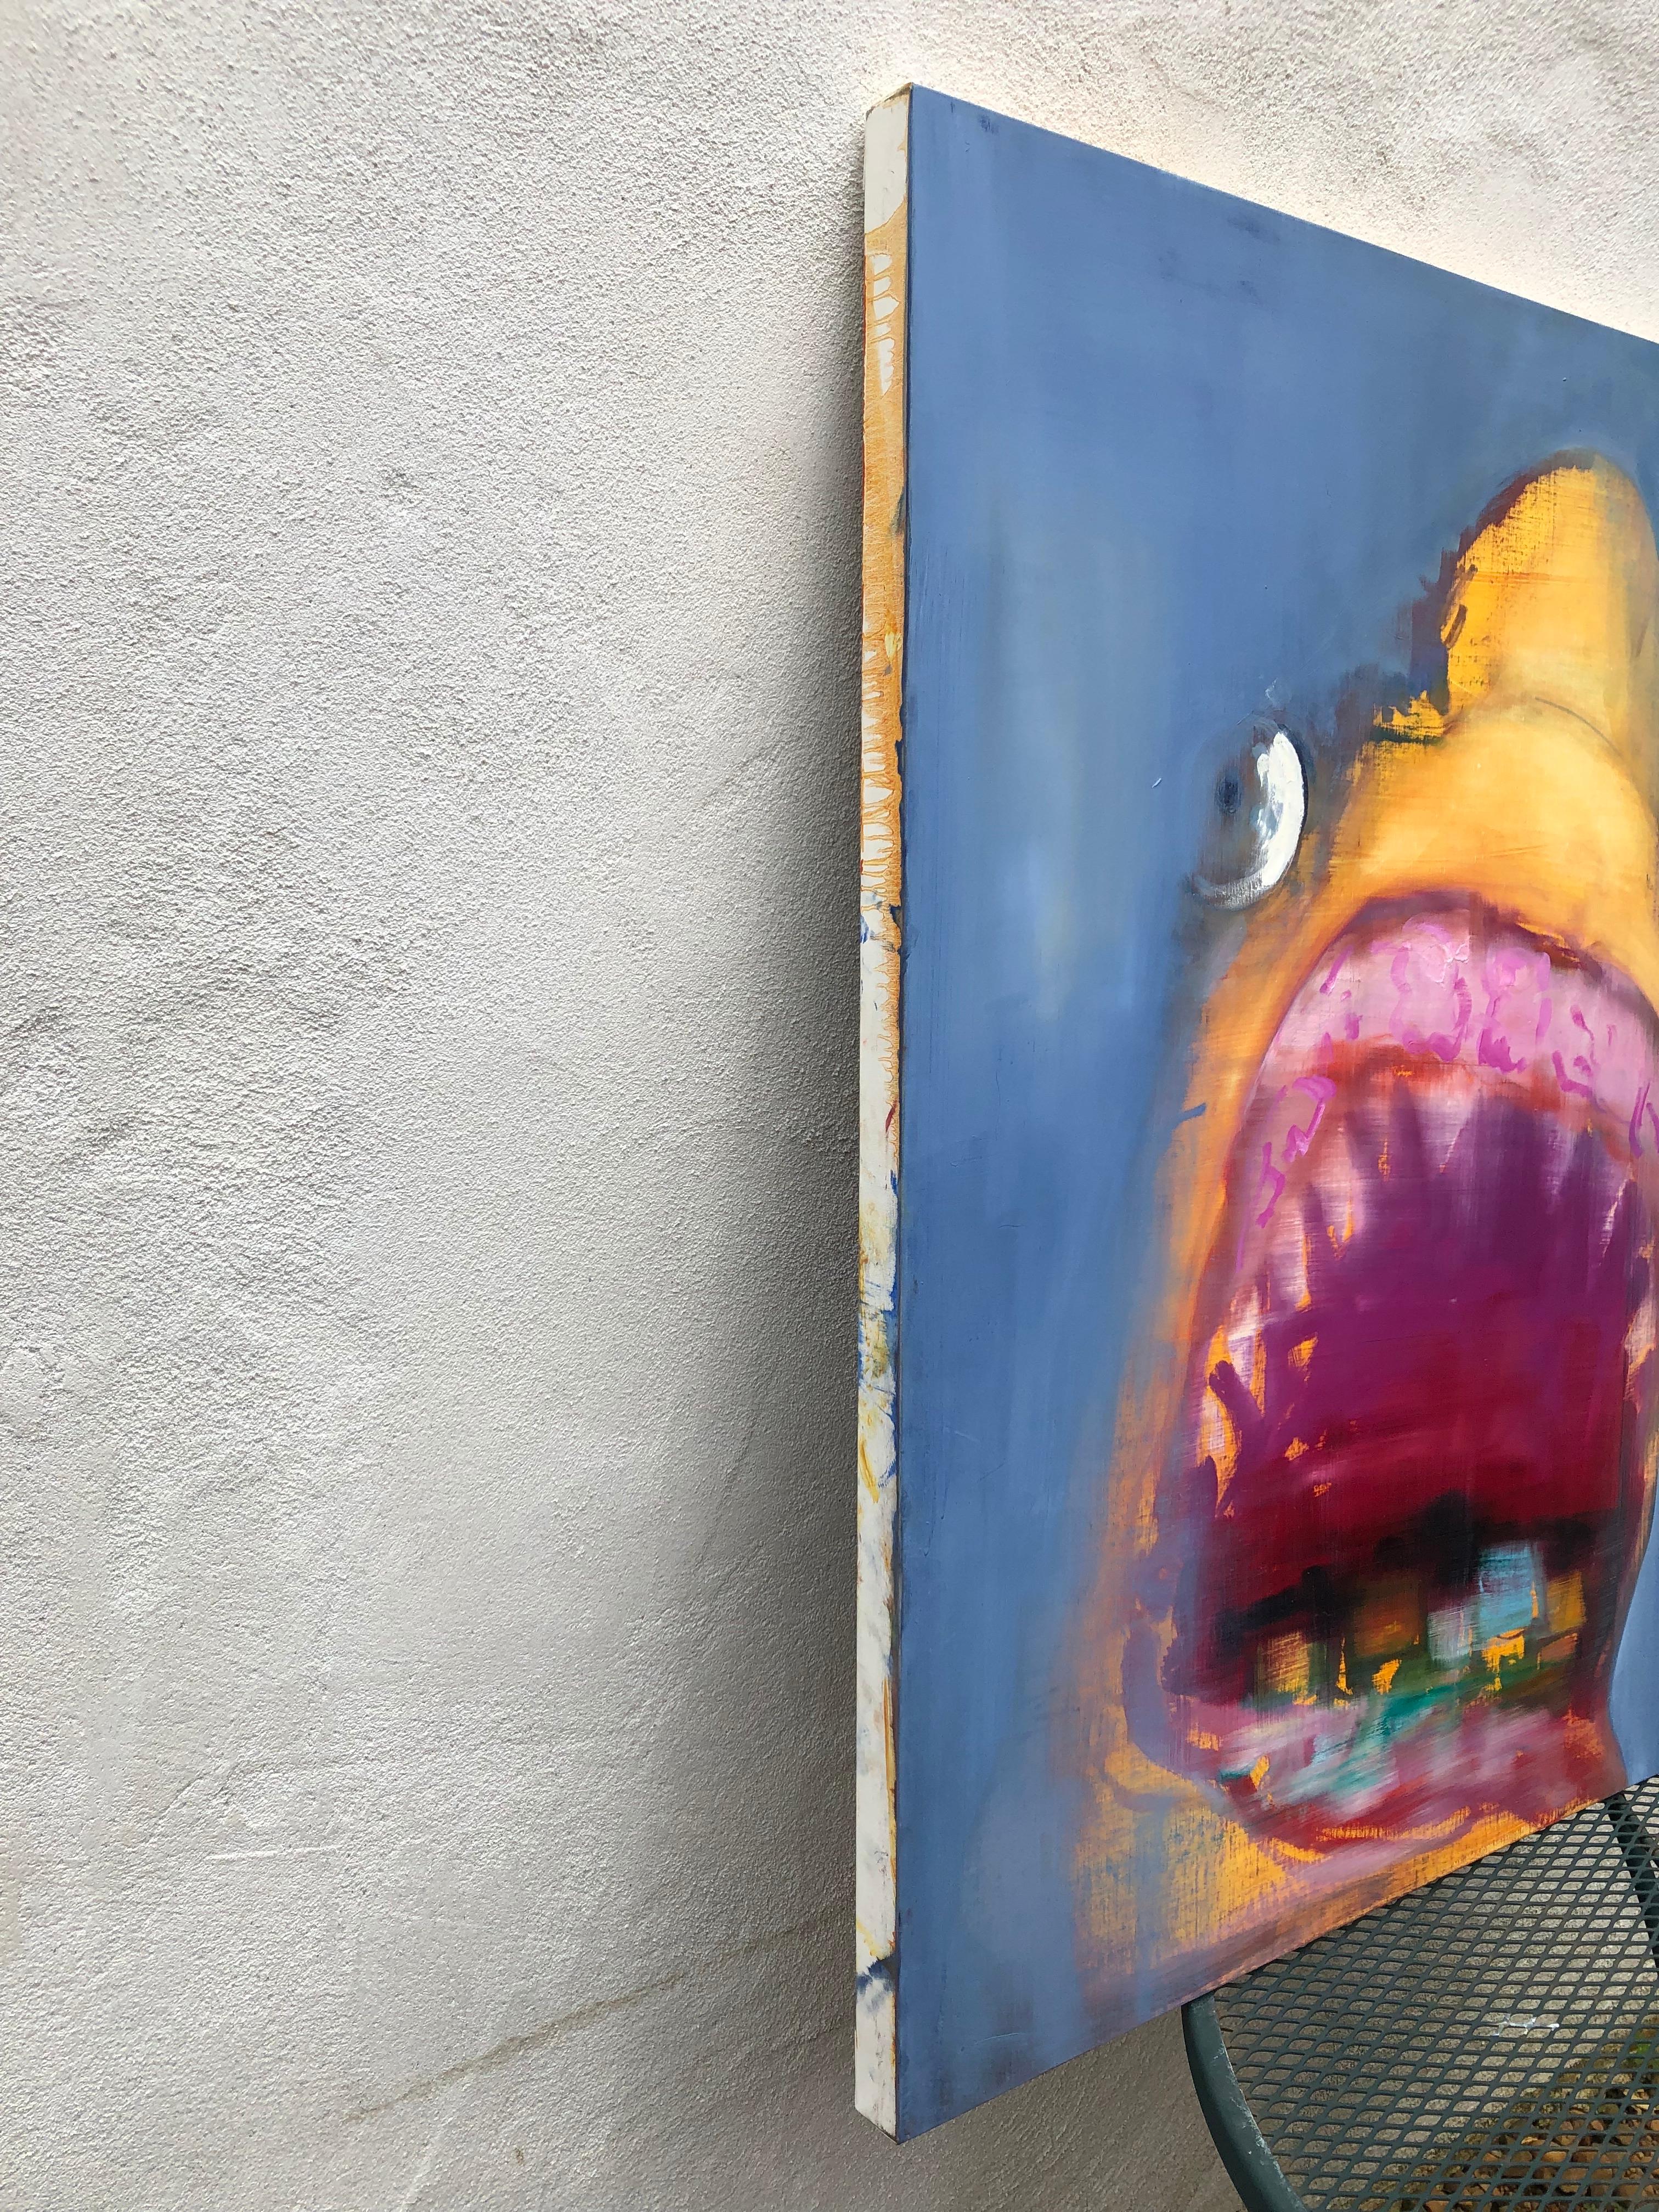 This fun oil painting of a shark would make a great statement in a beach house, a pool house, an entryway or a child's bedroom. The scene depicts a row of houses, part of a village, inside the shark's mouth. A child, perhaps, is looking out the